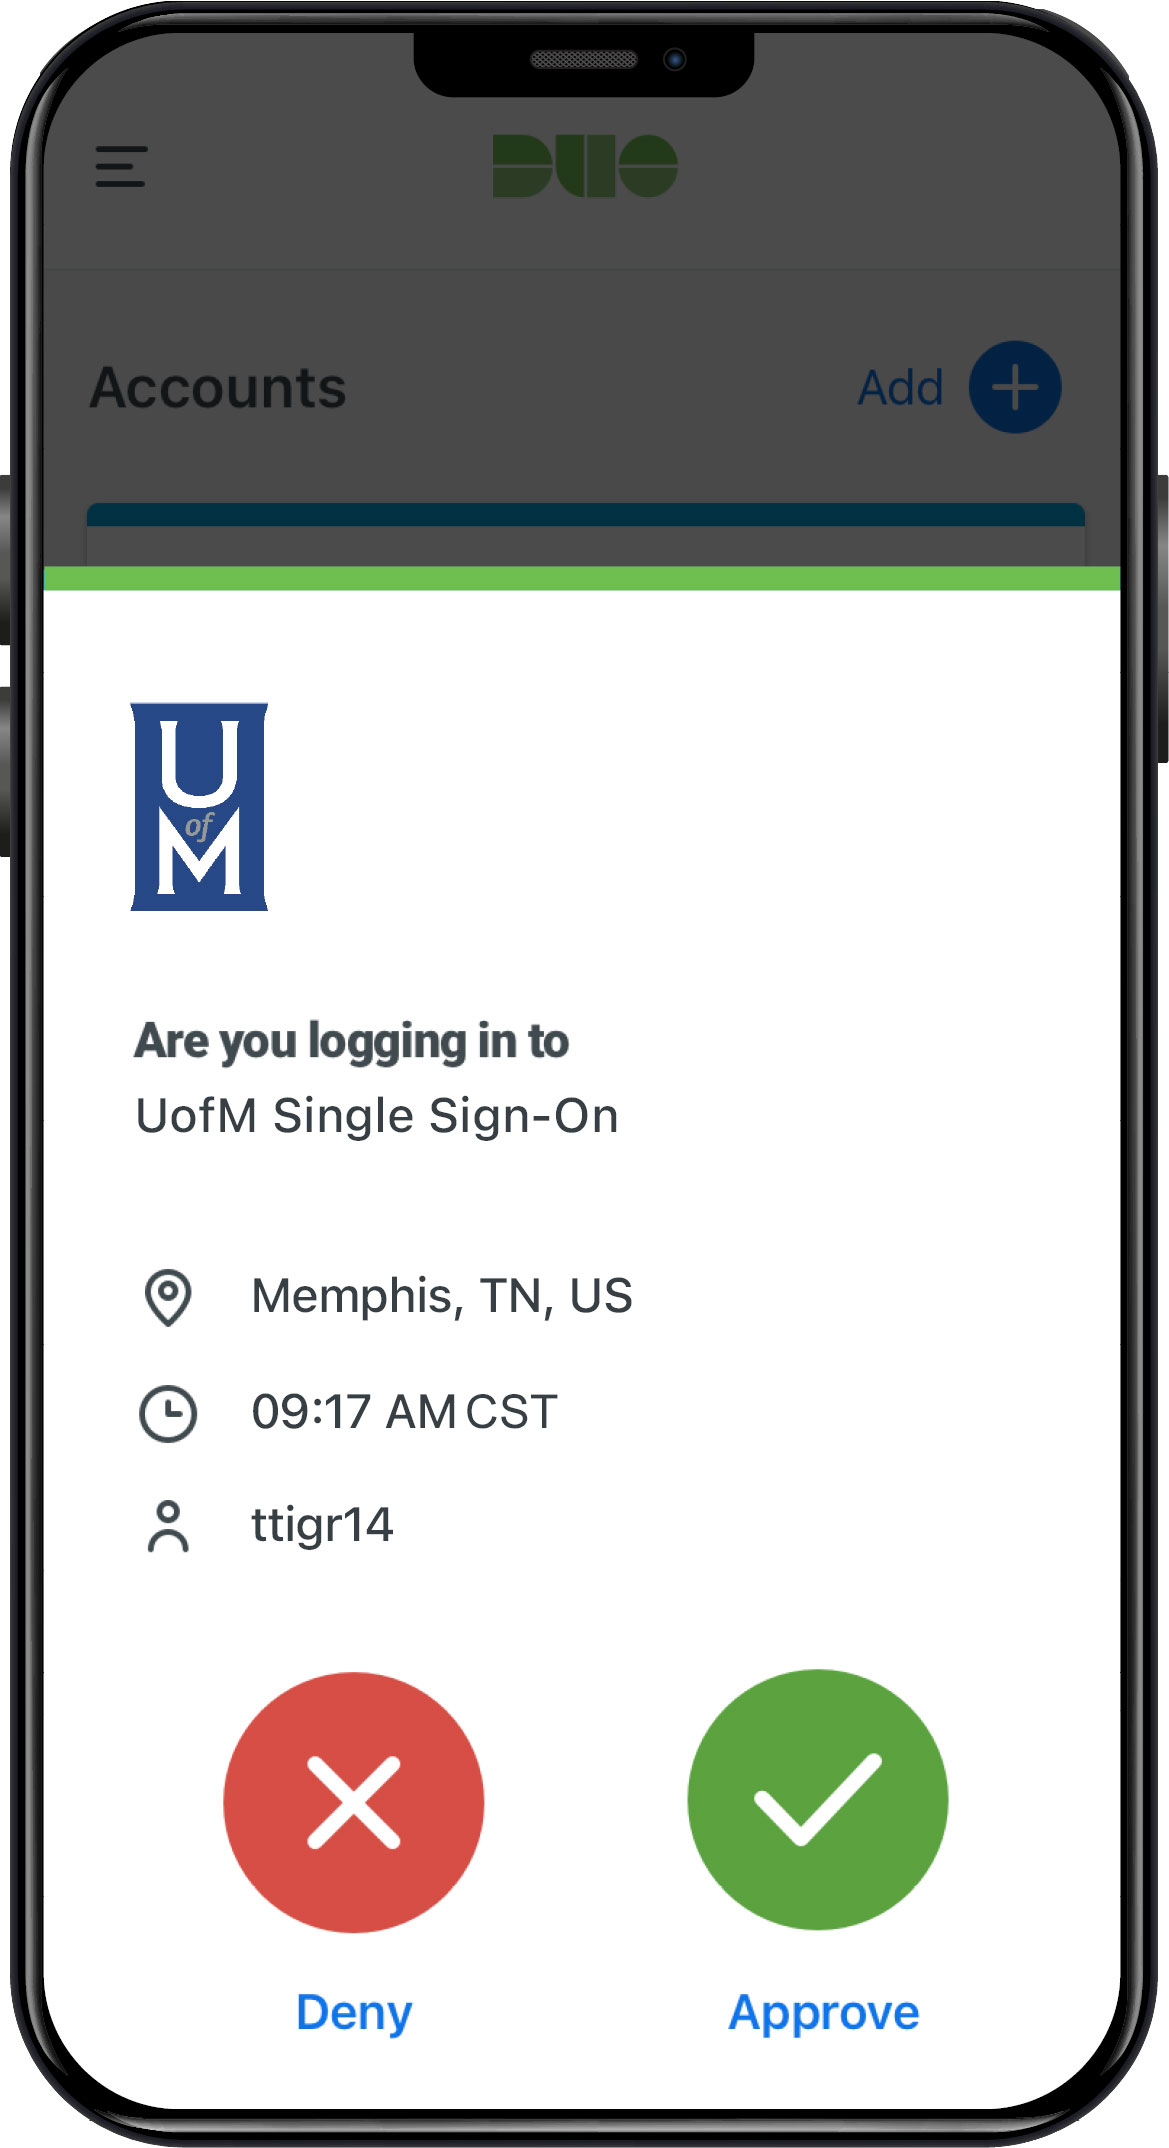 Mobile phone showing Duo mobile app with UofM authentication prompt